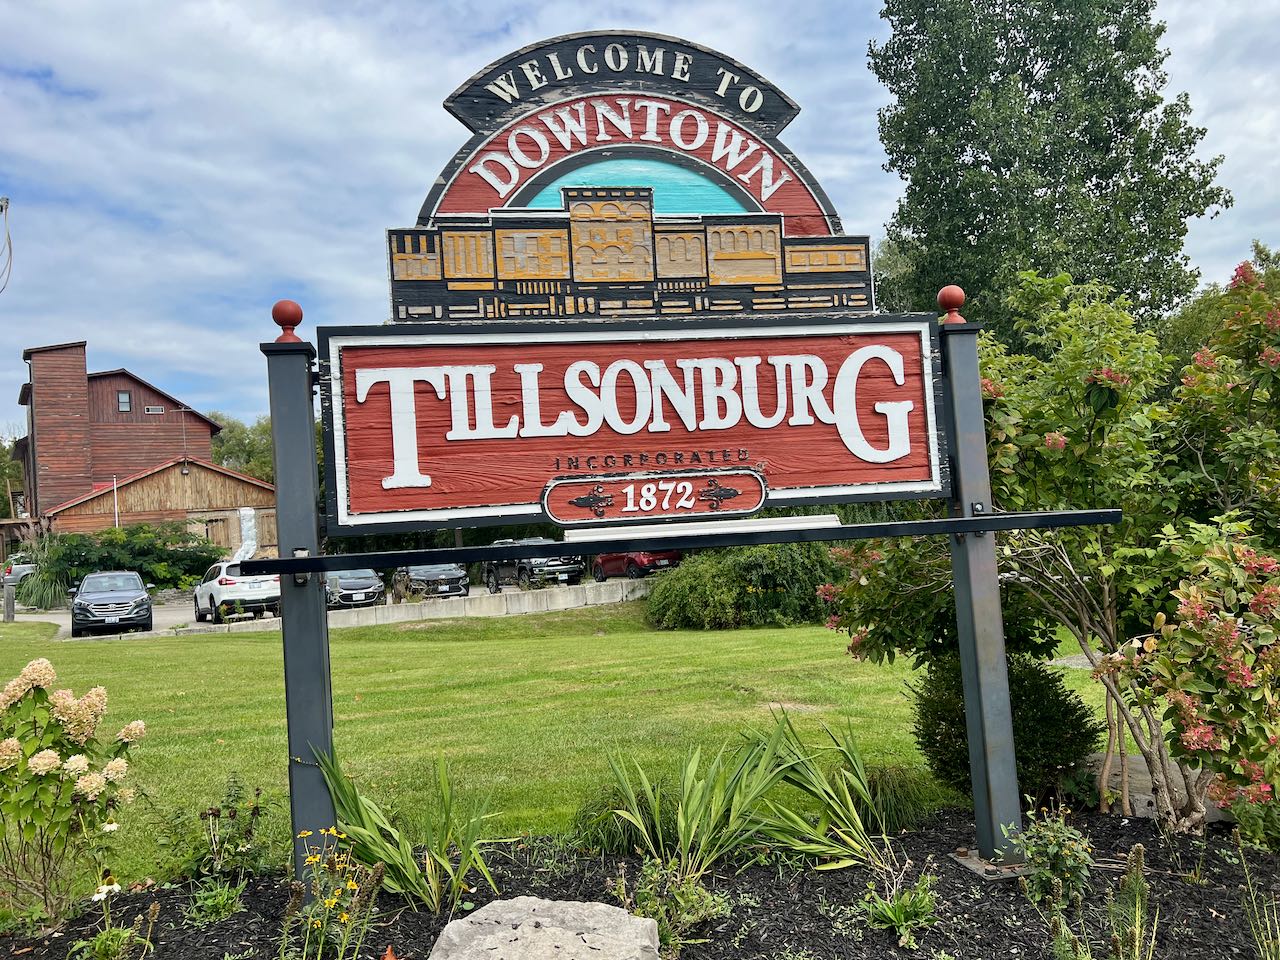 Tillsonburg is a historic town in the heart of Oxford County, Ontario Southwest.